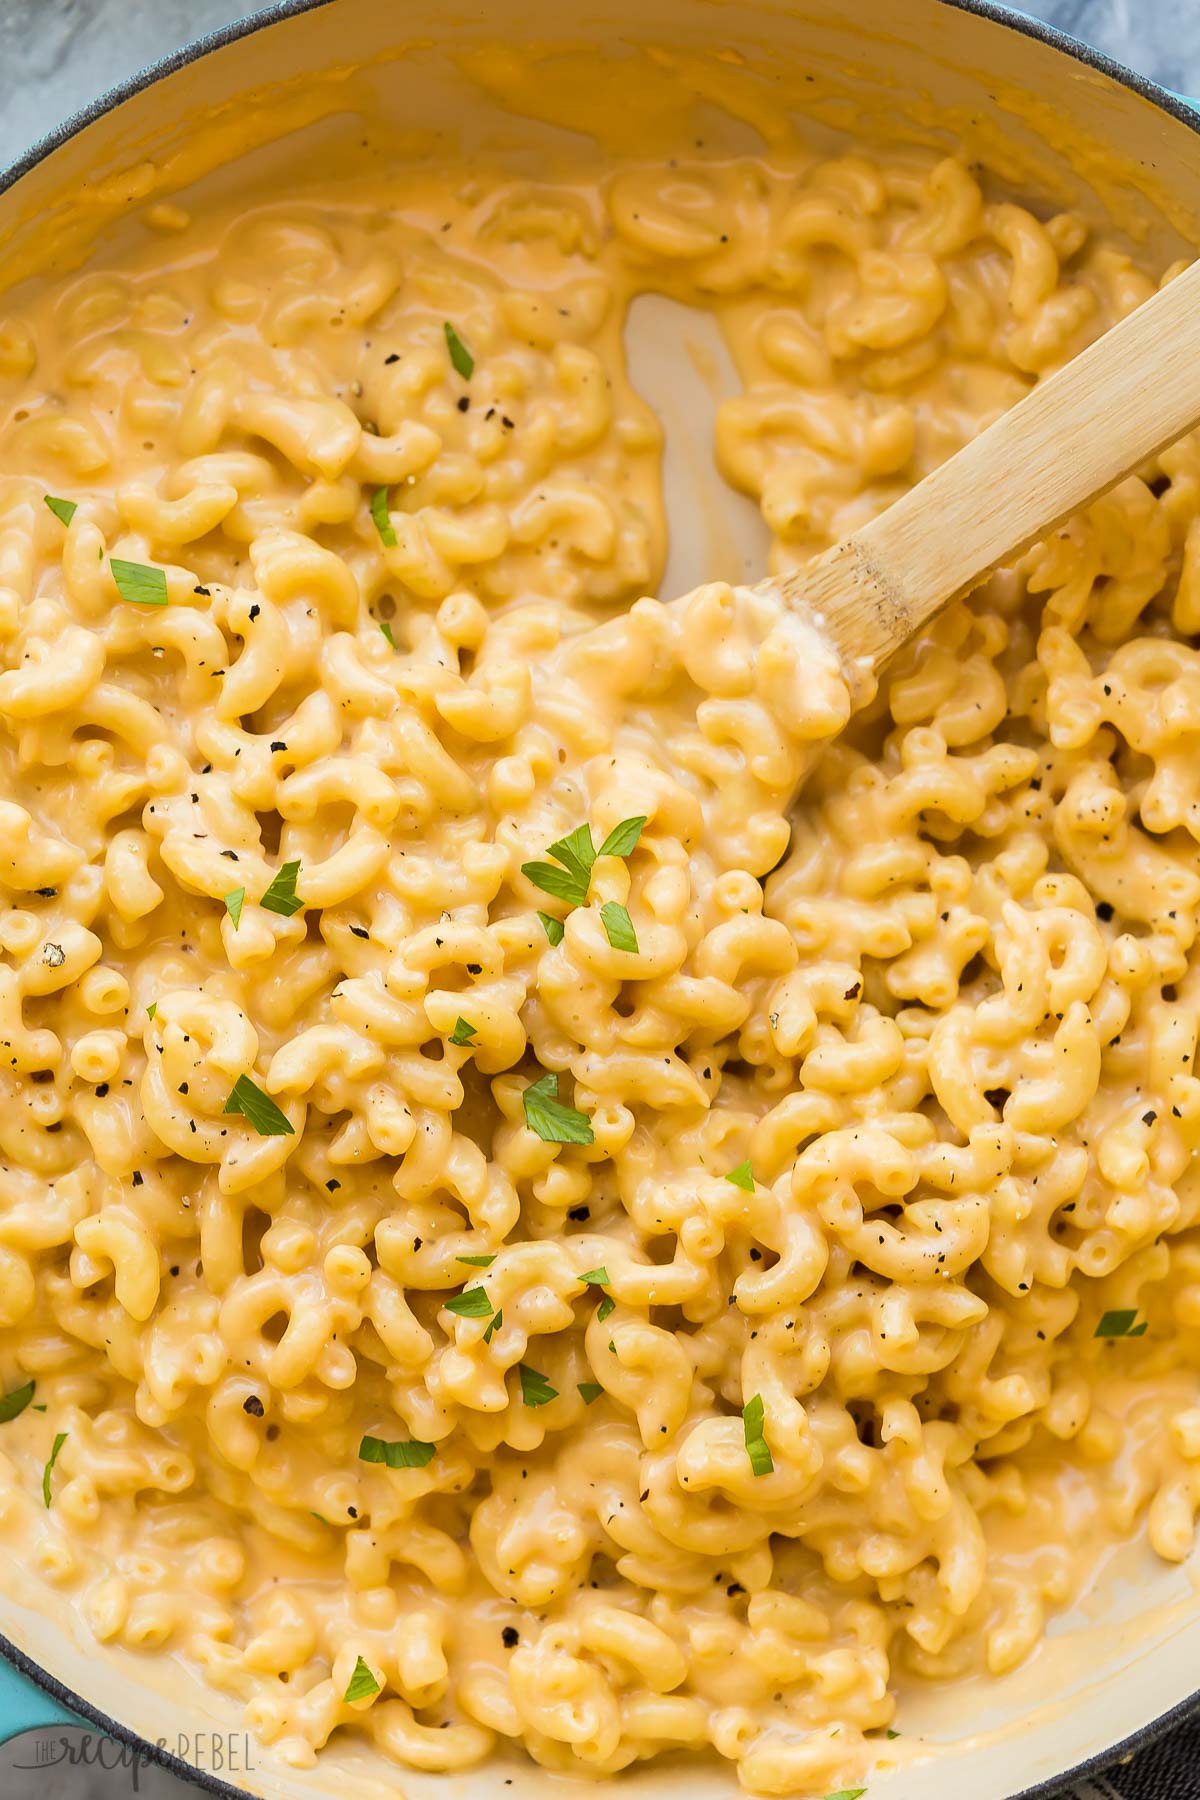 very close image of macaroni and cheese with wooden spoon